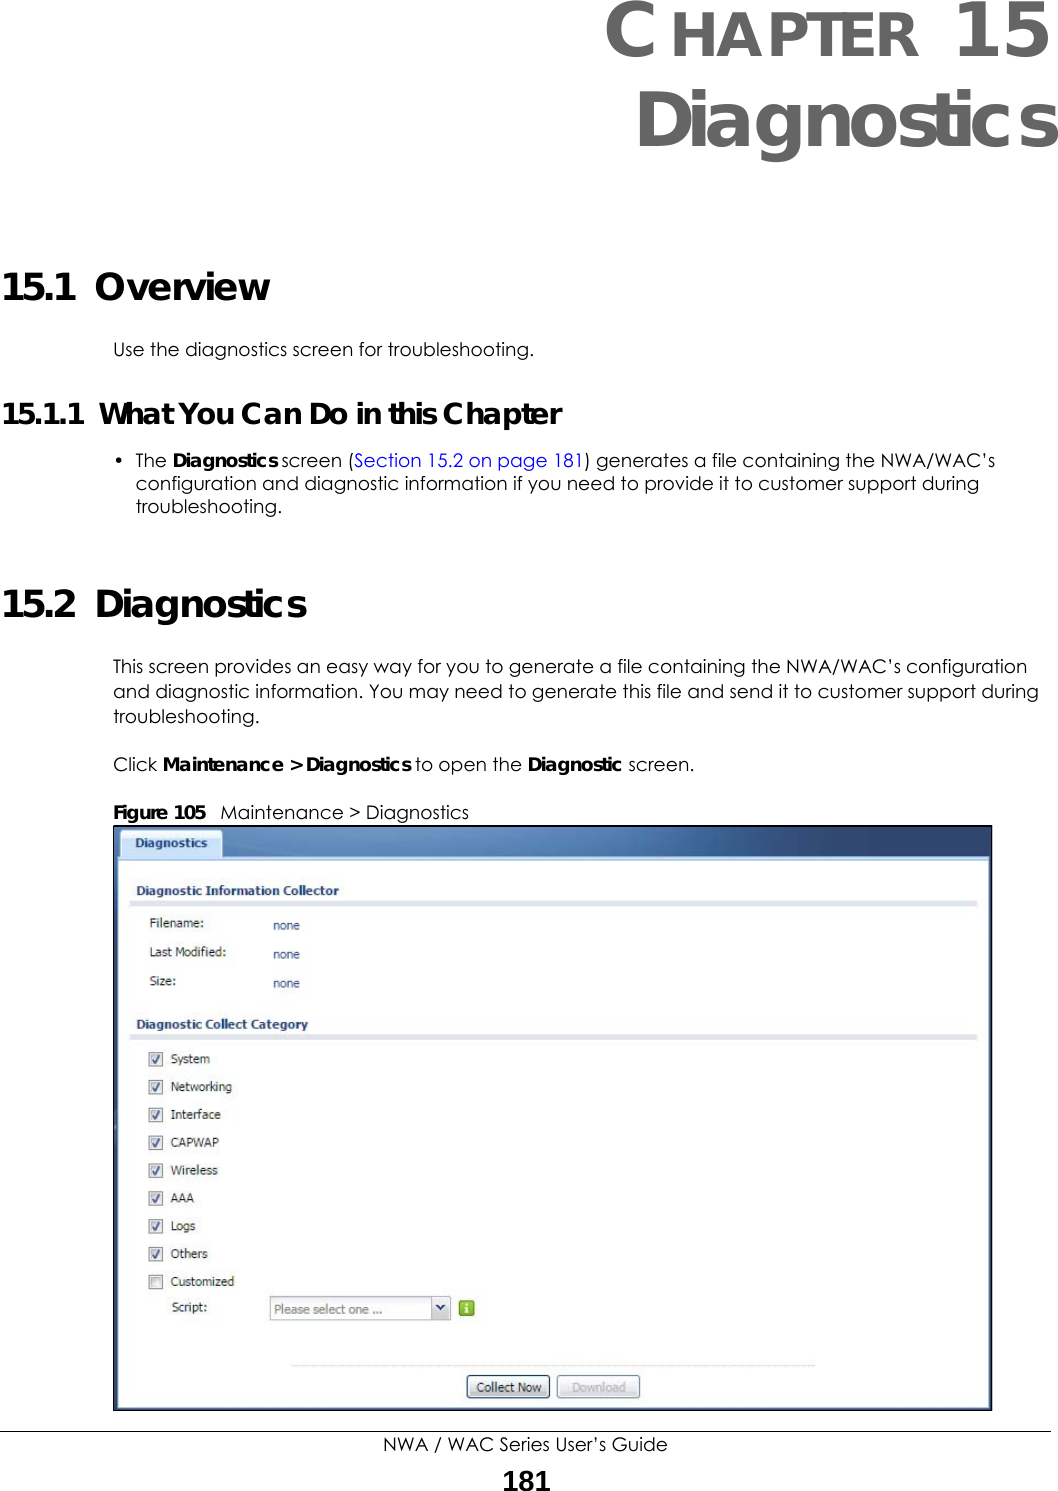 NWA / WAC Series User’s Guide181CHAPTER 15Diagnostics15.1  OverviewUse the diagnostics screen for troubleshooting. 15.1.1  What You Can Do in this Chapter• The Diagnostics screen (Section 15.2 on page 181) generates a file containing the NWA/WAC’s configuration and diagnostic information if you need to provide it to customer support during troubleshooting.15.2  Diagnostics This screen provides an easy way for you to generate a file containing the NWA/WAC’s configuration and diagnostic information. You may need to generate this file and send it to customer support during troubleshooting.Click Maintenance &gt; Diagnostics to open the Diagnostic screen. Figure 105   Maintenance &gt; Diagnostics  